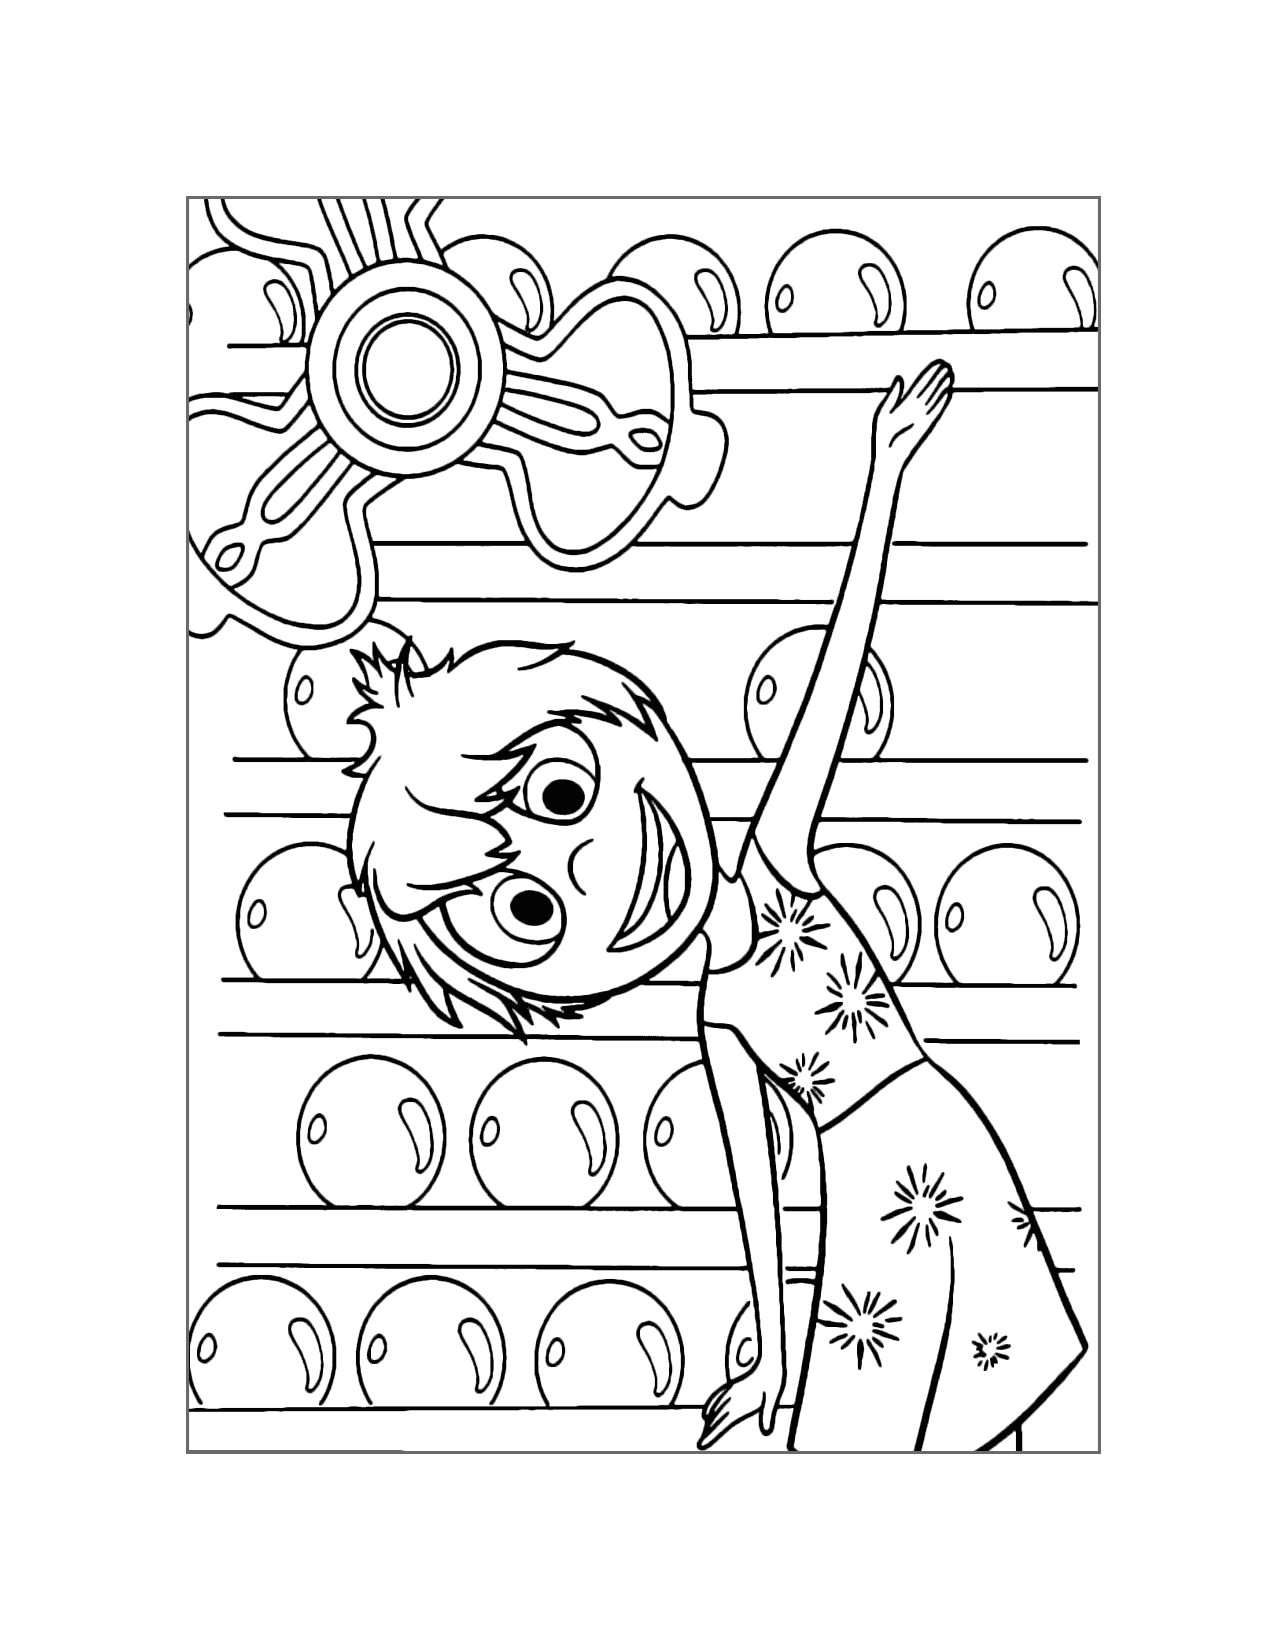 Fun Joy Inside Out Coloring Page